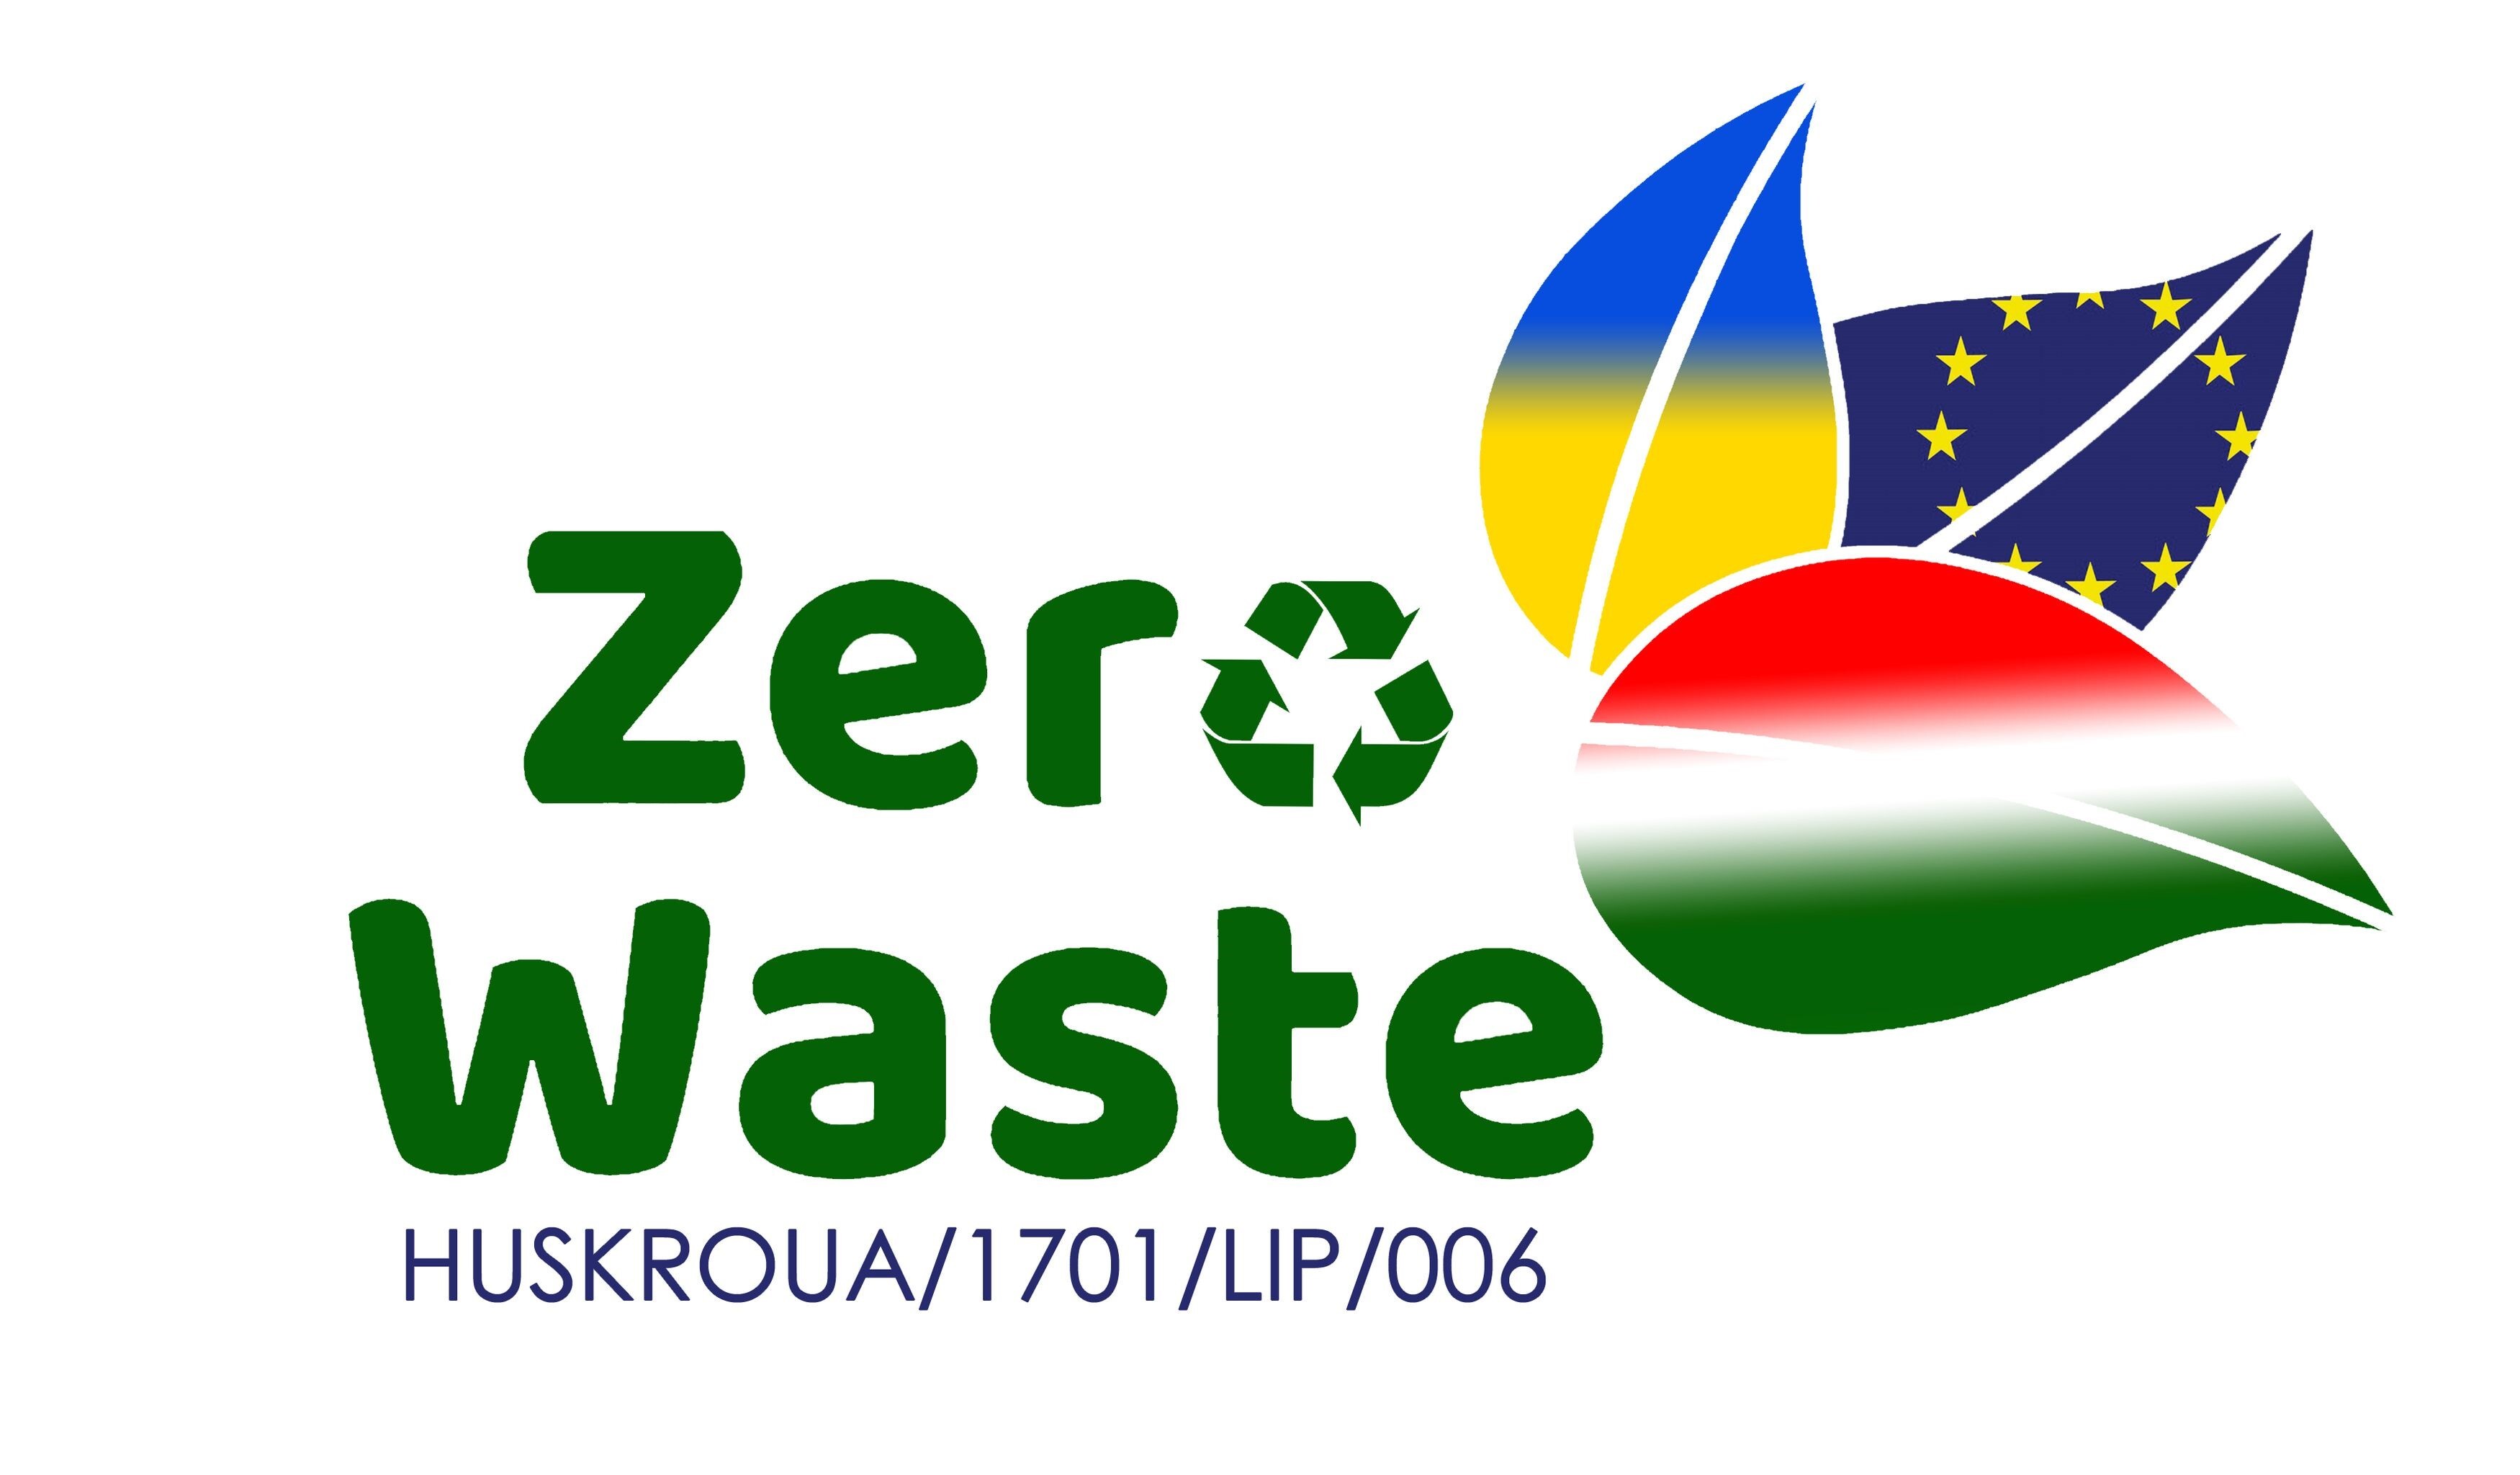 Upcoming Zero Waste launching conference